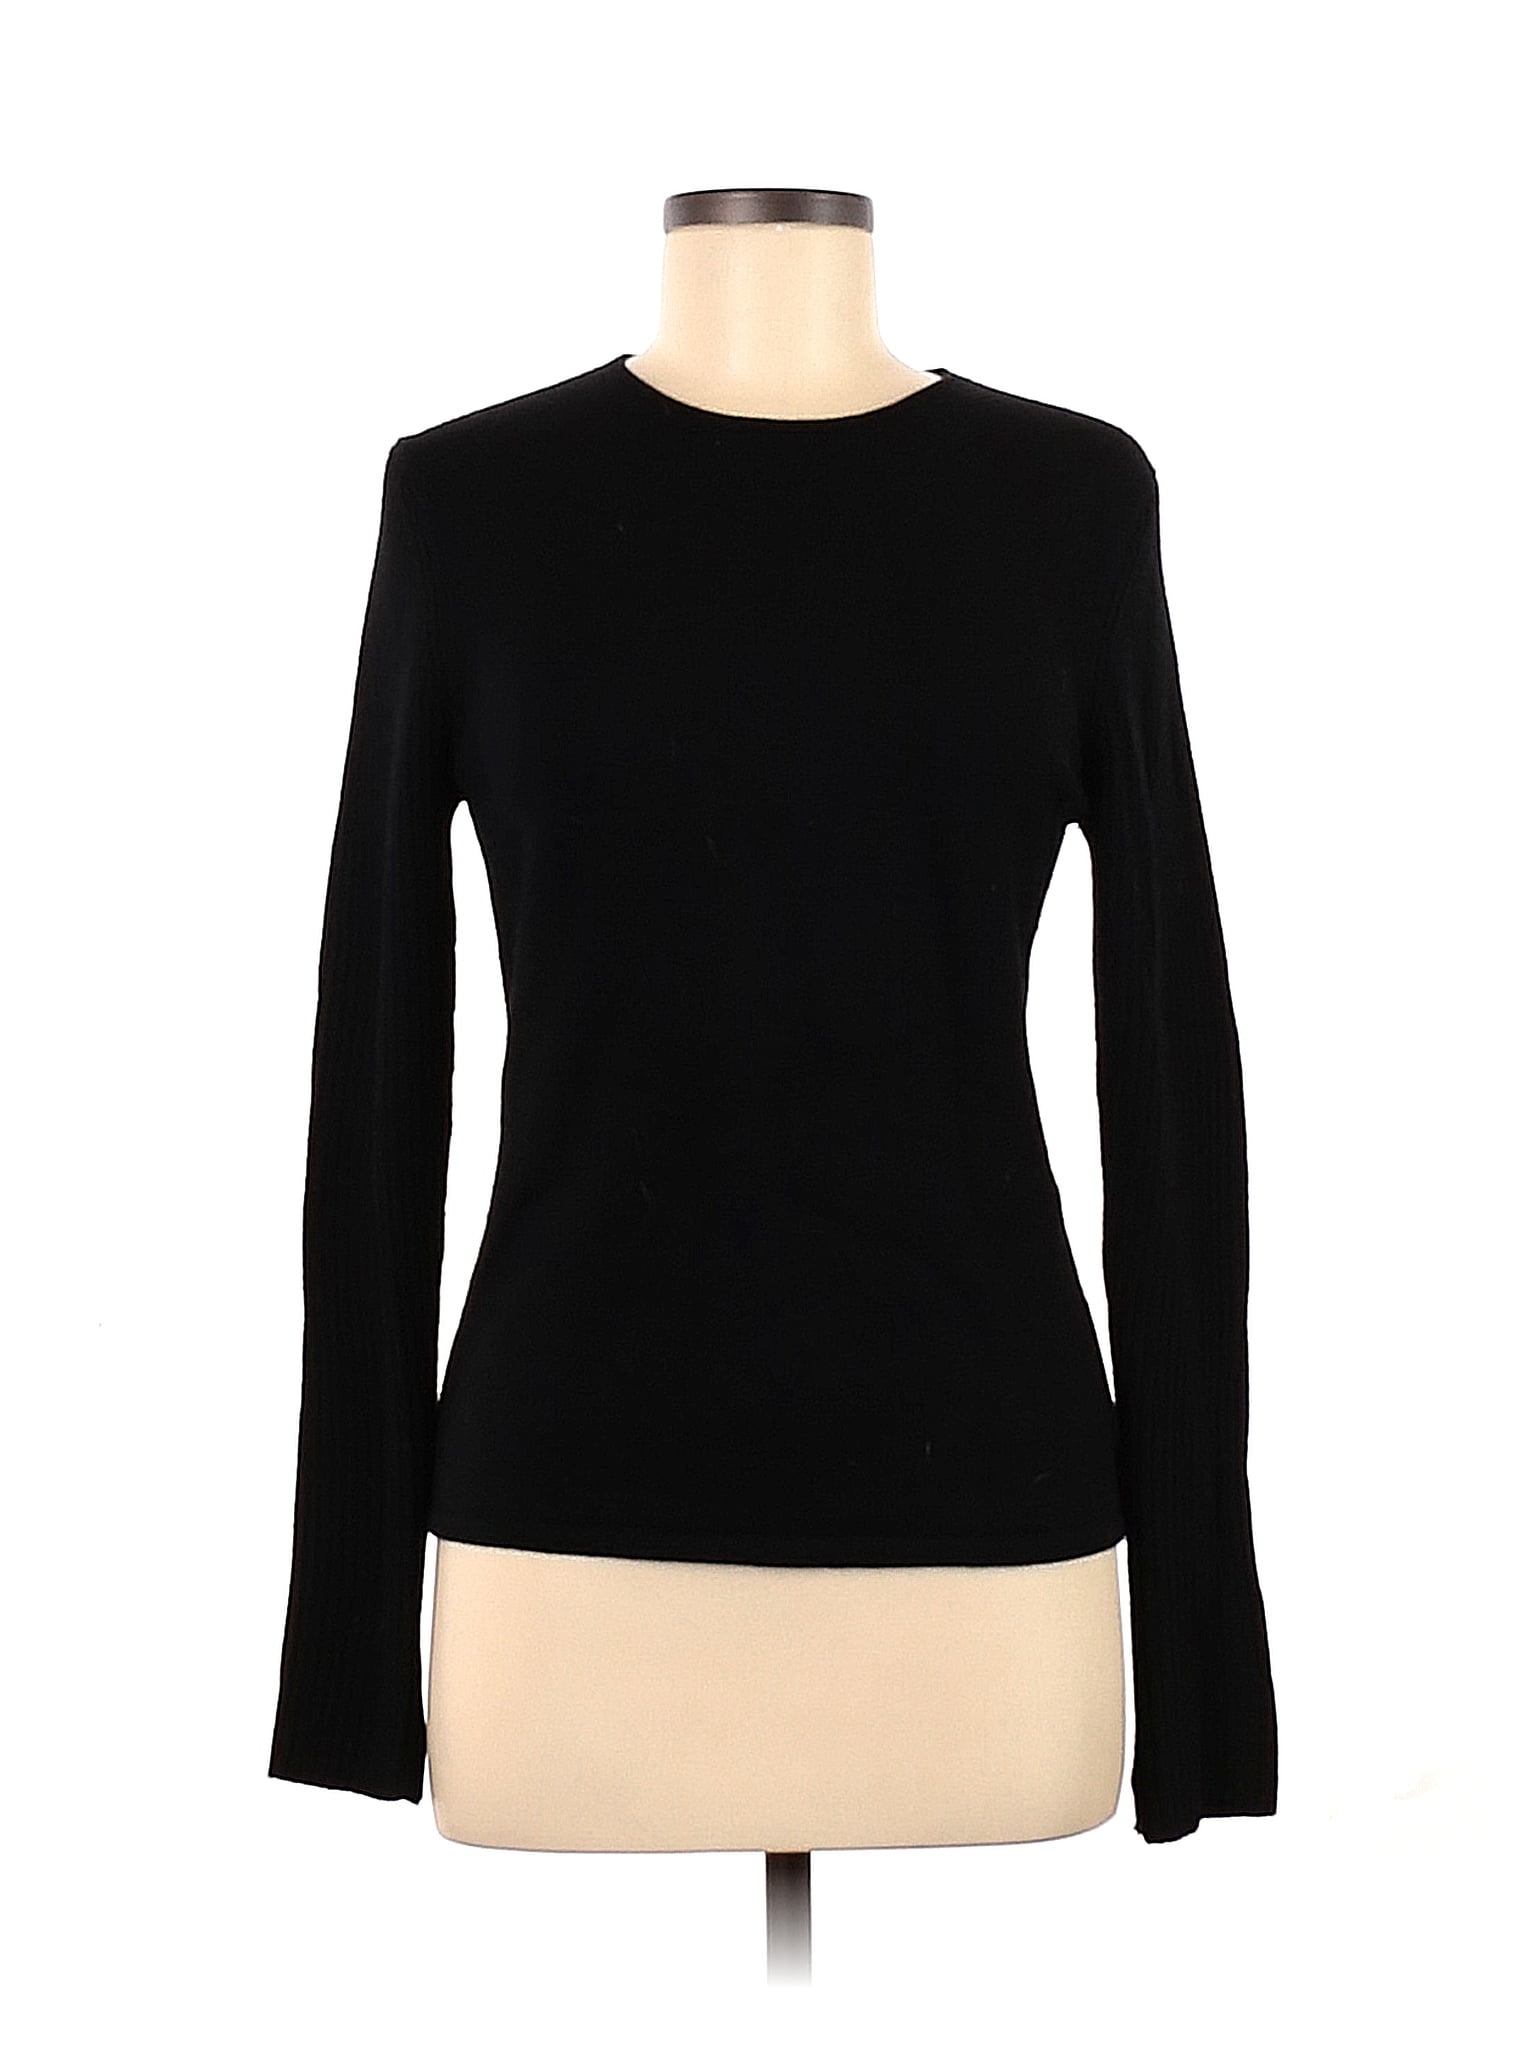 Elie Tahari Color Block Solid Black Wool Pullover Sweater Size M - 85% ...